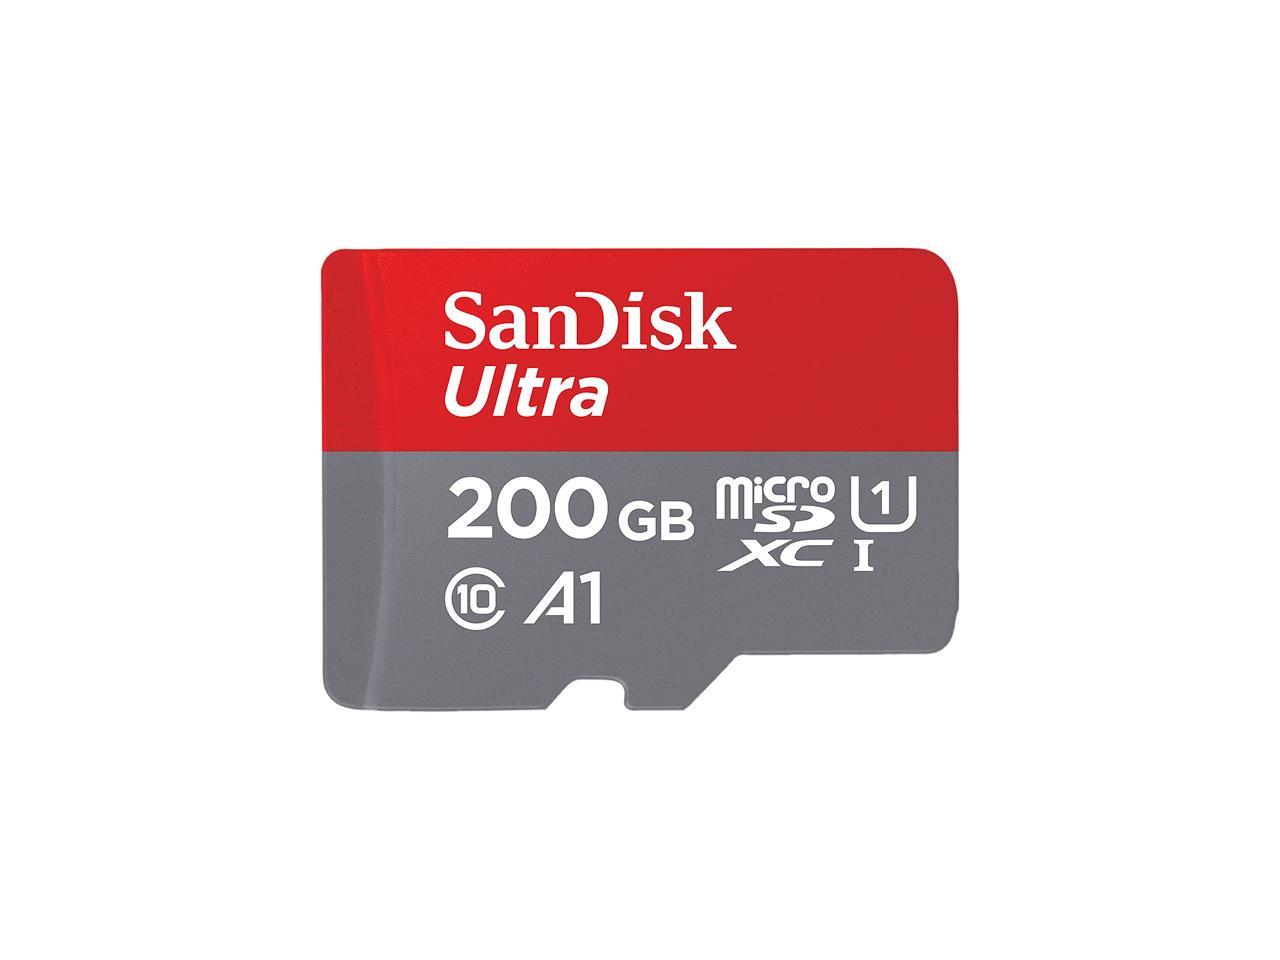 SanDisk Ultra 200GB MicroSDXC Verified for Alcatel OneTouch Idol X by SanFlash 100MBs A1 U1 C10 Works with SanDisk 